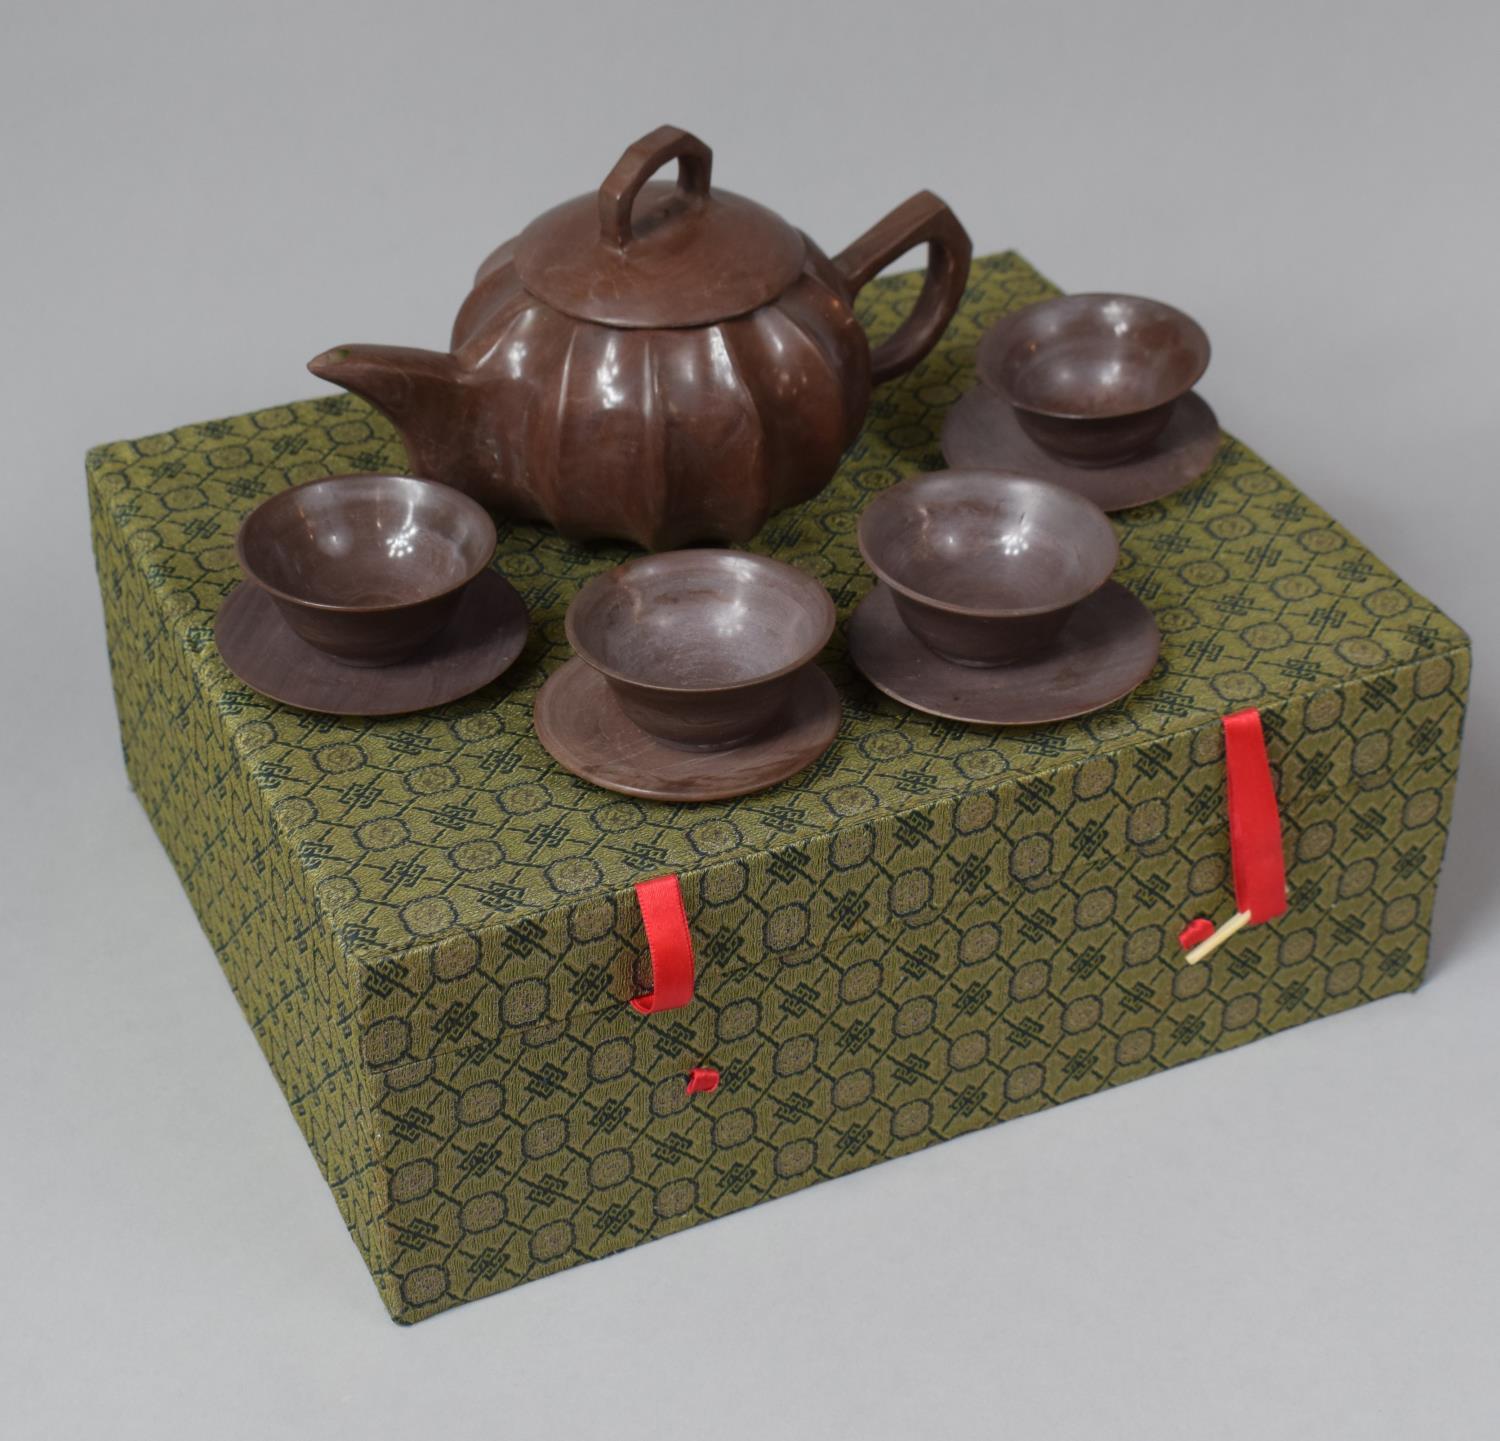 A Mid/Late 20th Century Oriental Boxed Hard Stone Teaset to Comprise Teapot, Four Tea Bowls and Four